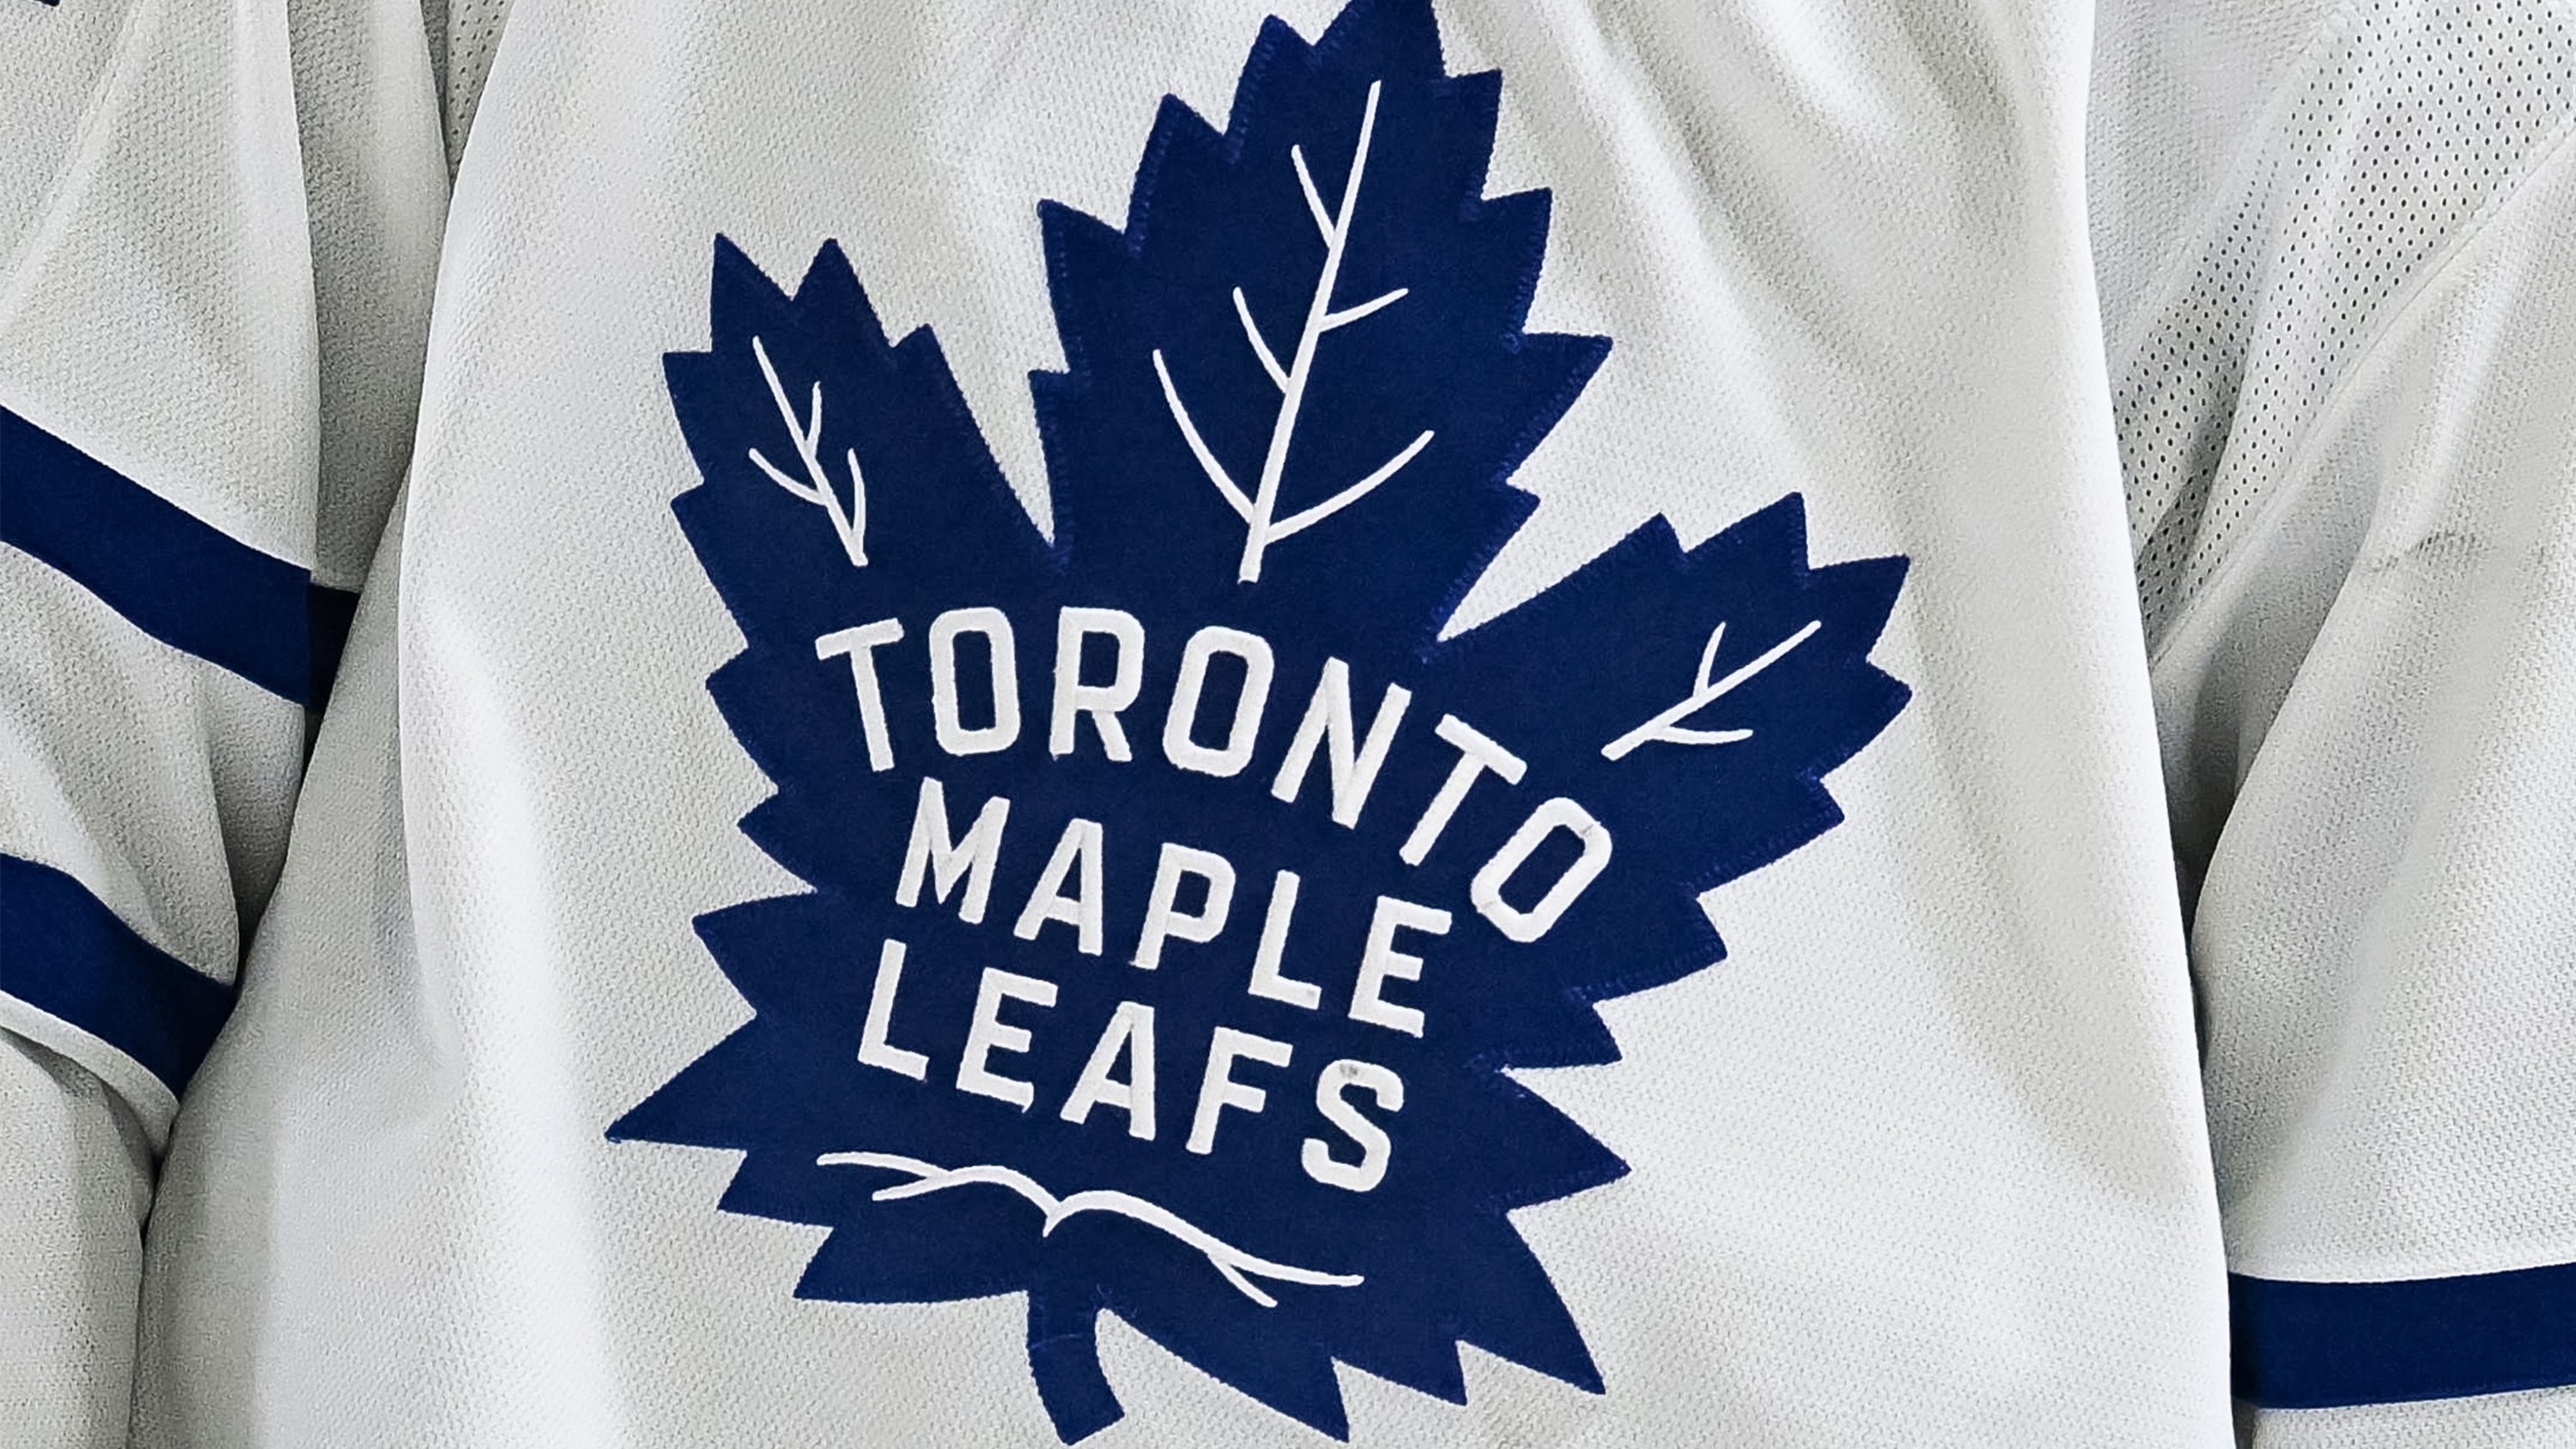 67 Toronto Maple Leafs Sweaters and History  Maple leafs, Toronto maple  leafs, Toronto maple